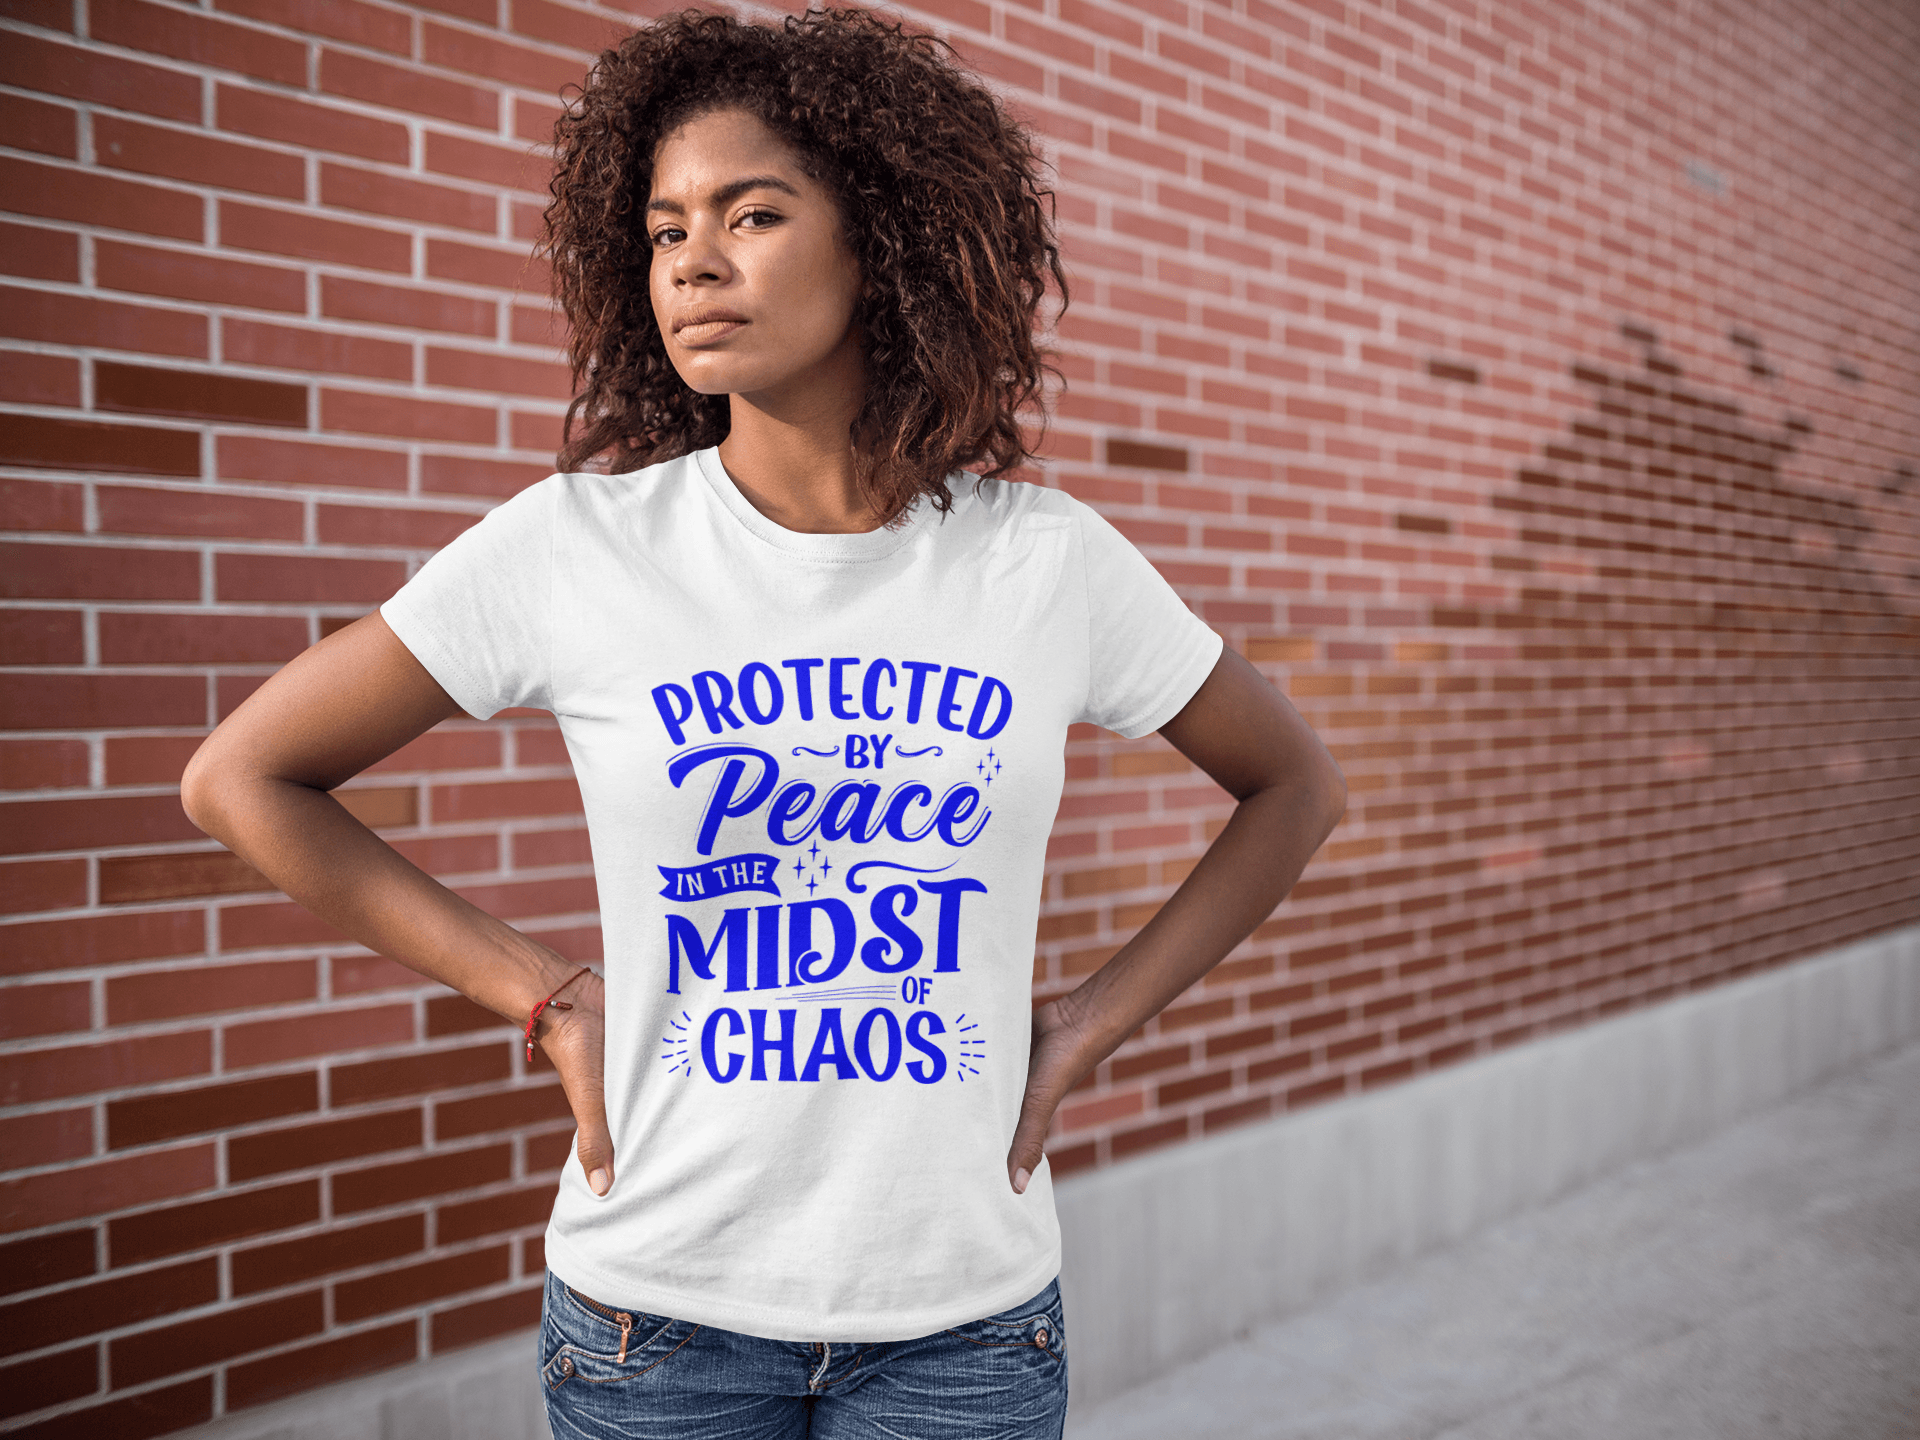 Protected by Peace in the Midst of Chaos T-shirt - Women Empowerment T-Shirts & Apparel | CP Designs Unlimited